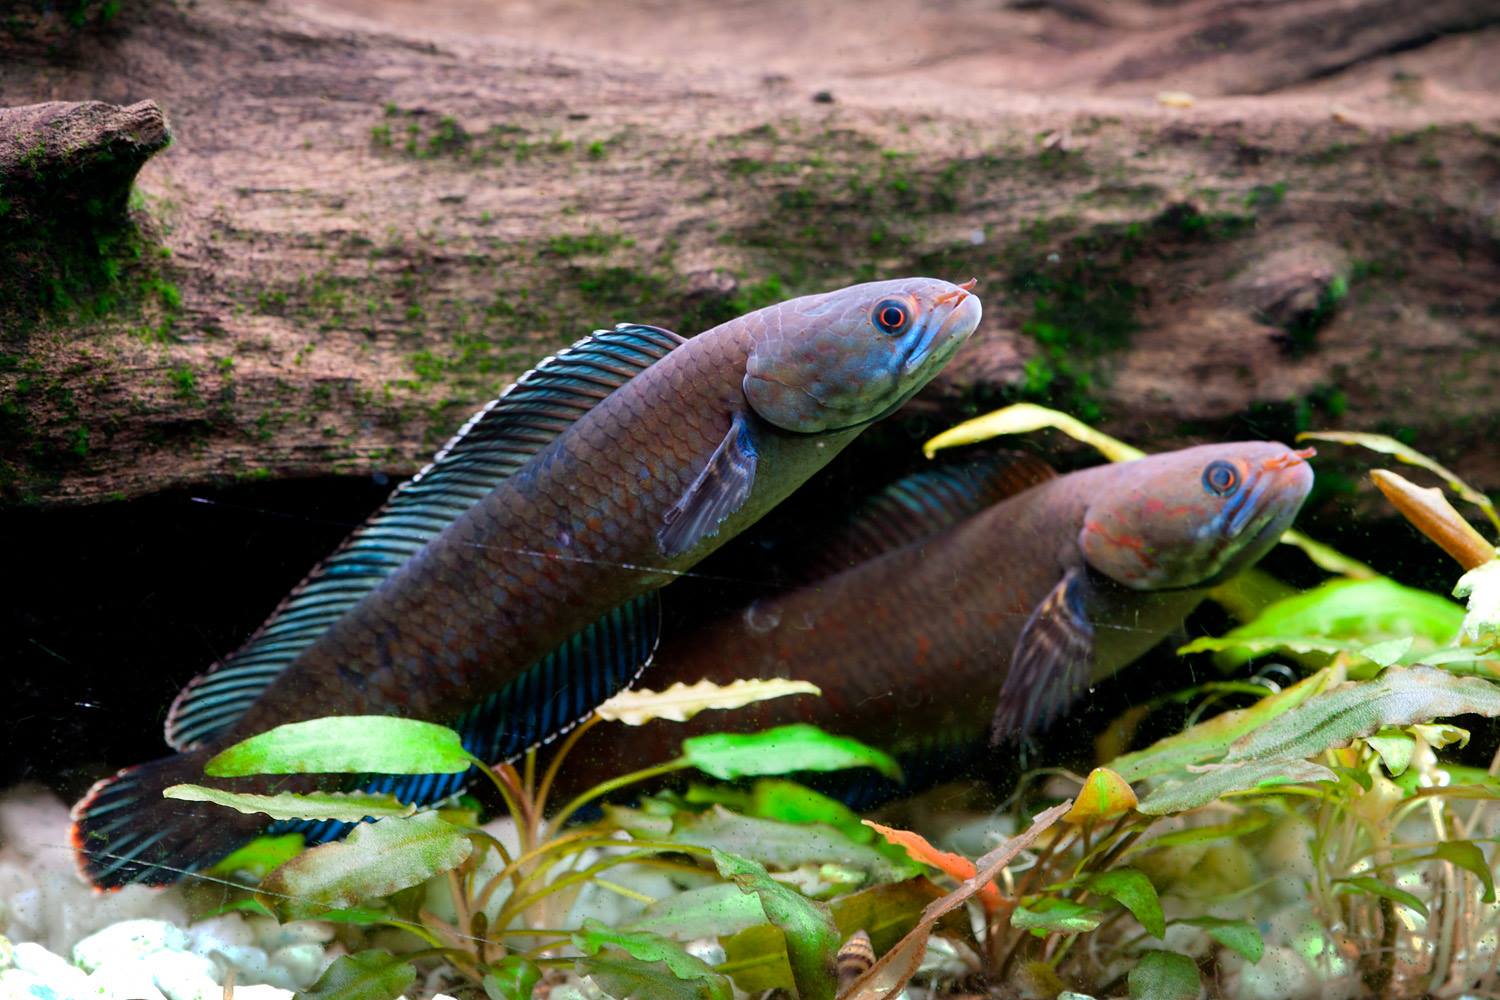 Channa Andrao, a vibrant blue ‘walking’ dwarf snakehead fish, was discovered in the Lefraguri swamp in West Bengal, raising the number of snakehead species endemic to the Eastern Himalayas to ten. Snakeheads breath air and can survive on land for up to four days. They have been known to “walk” up to a quarter mile between bodies of water.